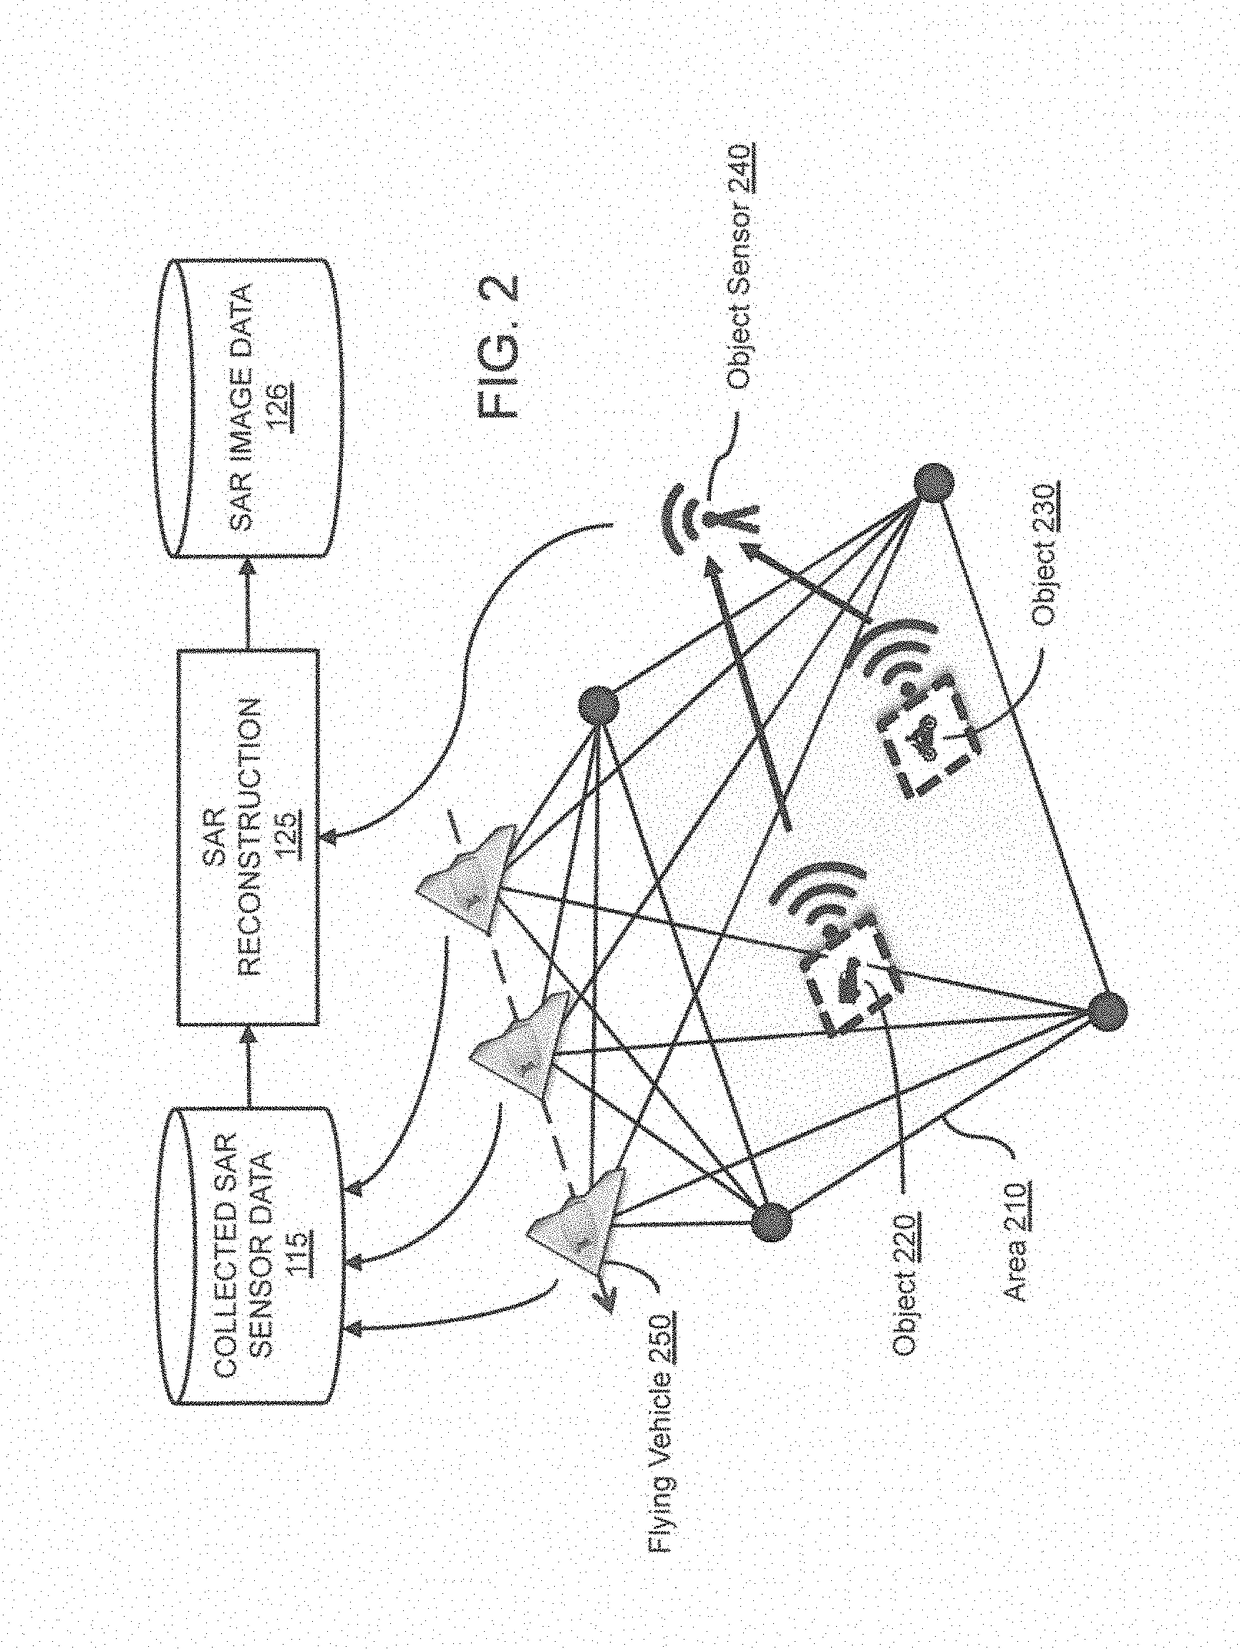 Systems and methods for recognizing objects in radar imagery